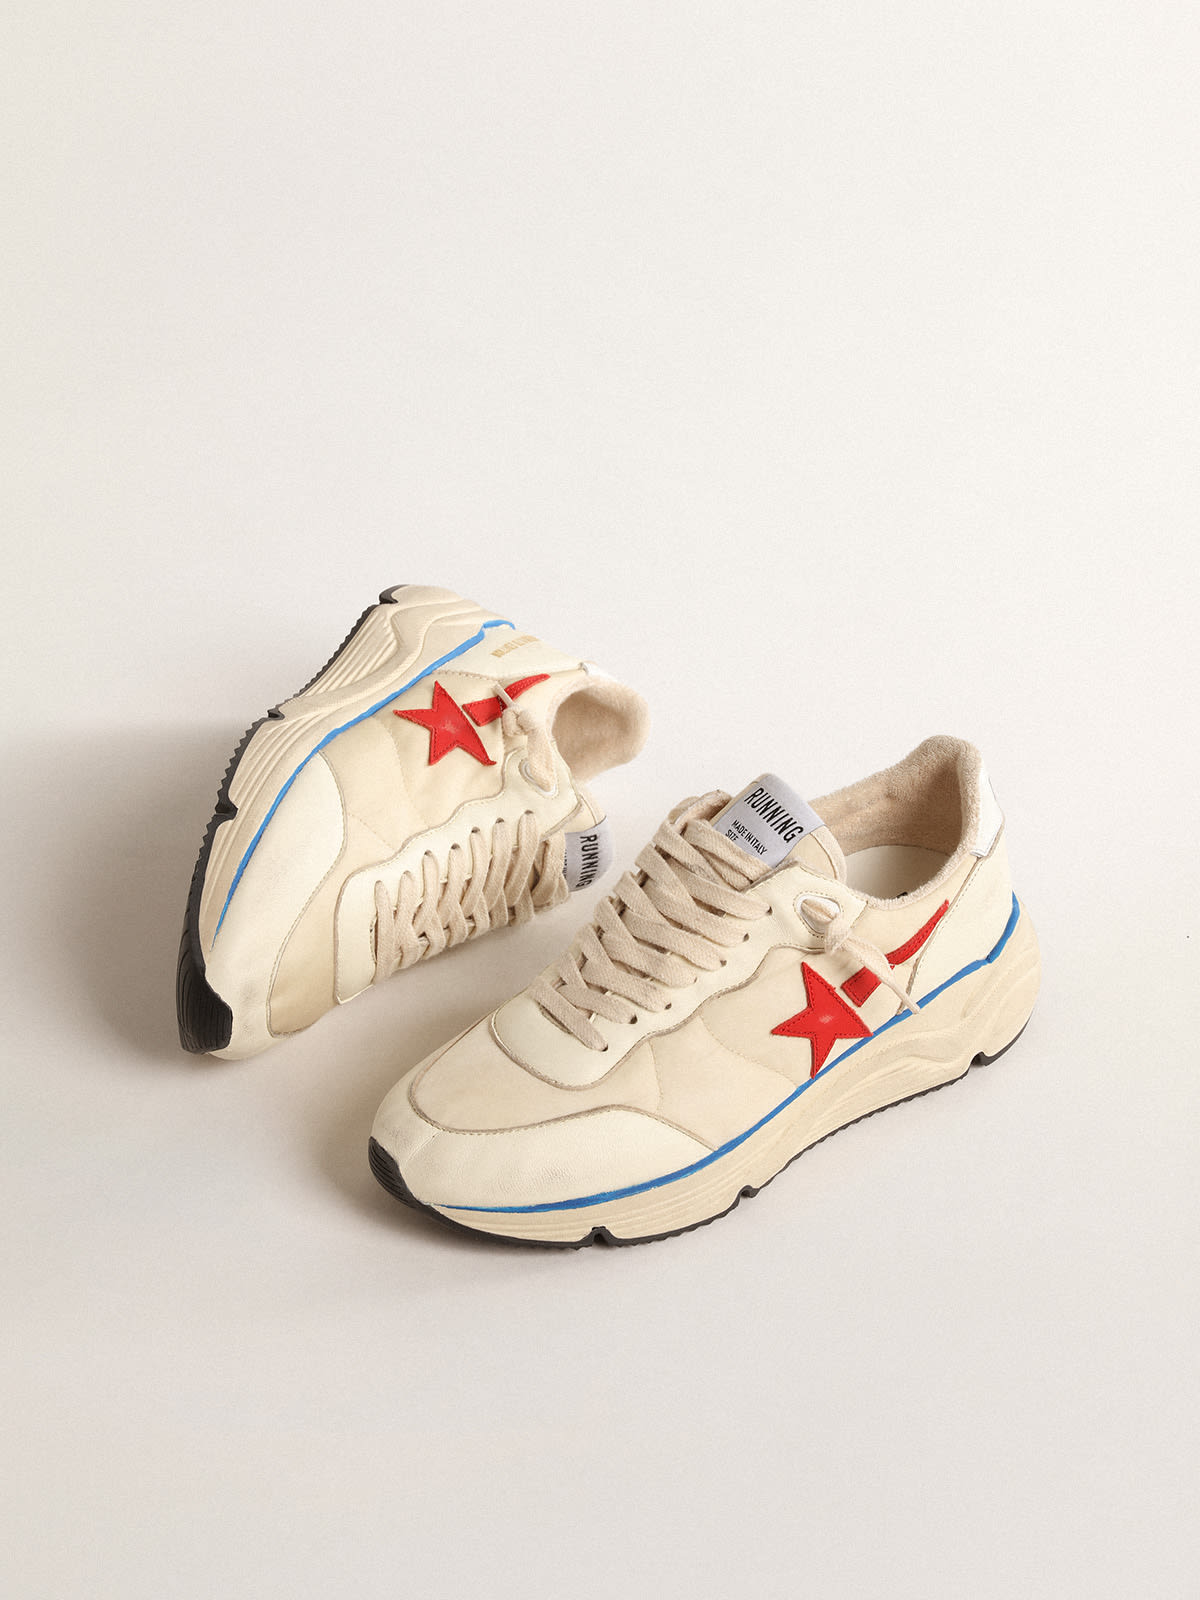 Golden Goose - Women’s Running Sole LTD in beige nylon with red leather star in 